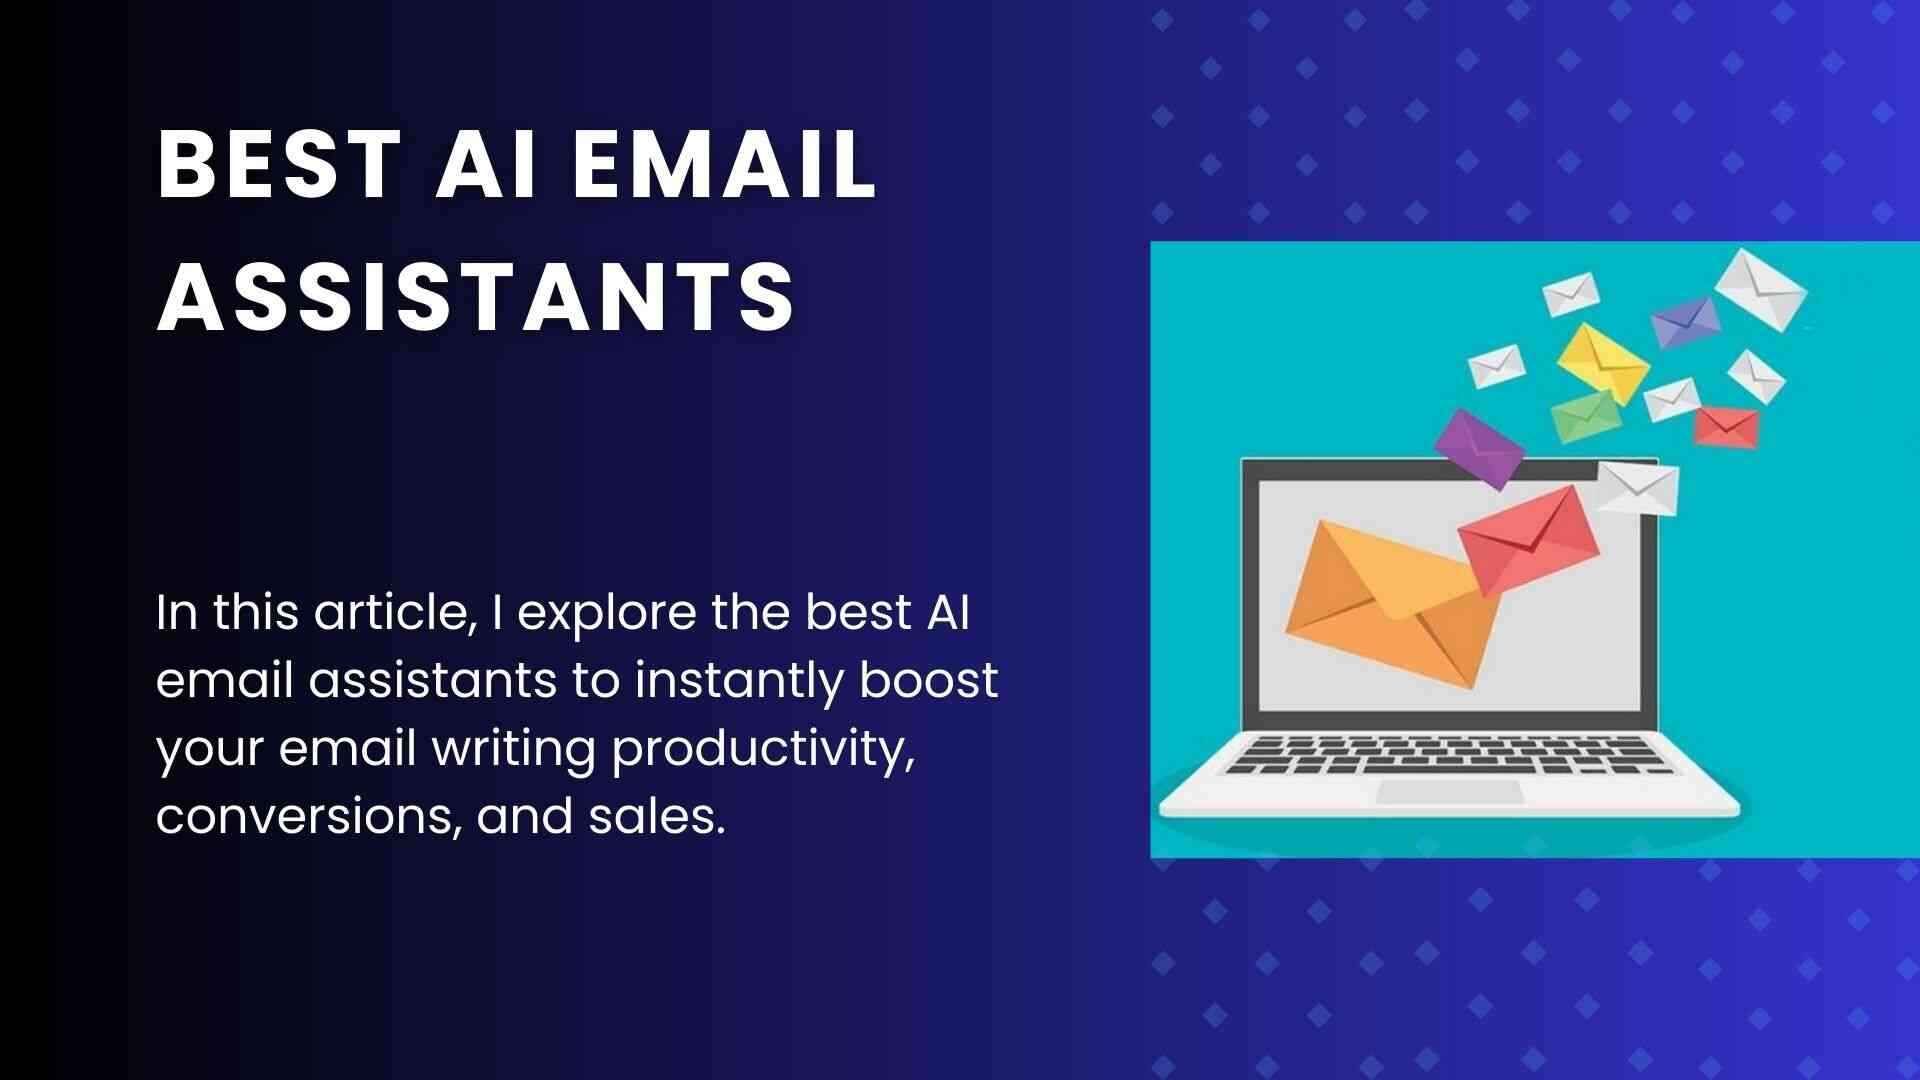 The Best AI Email Assistants